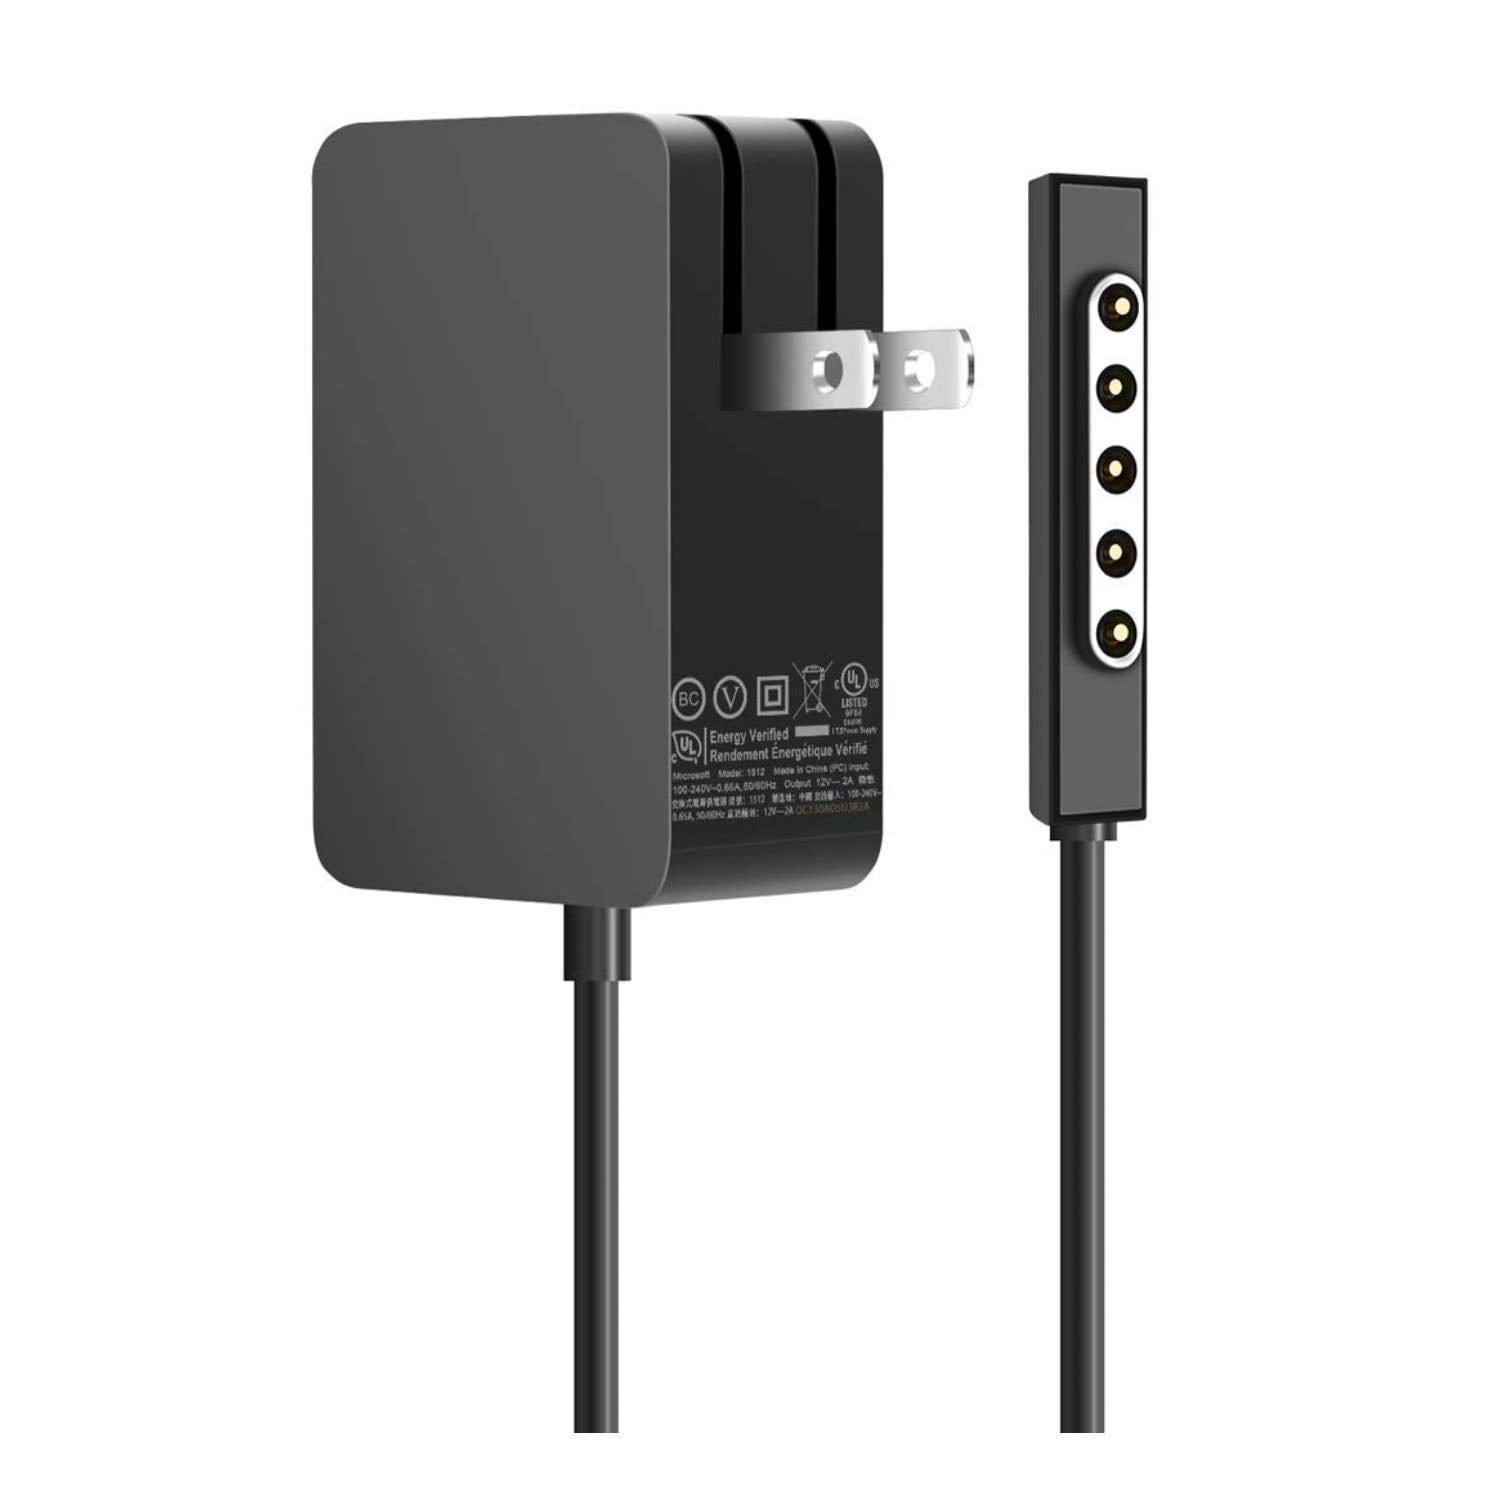 surface pro 2 charger walmart